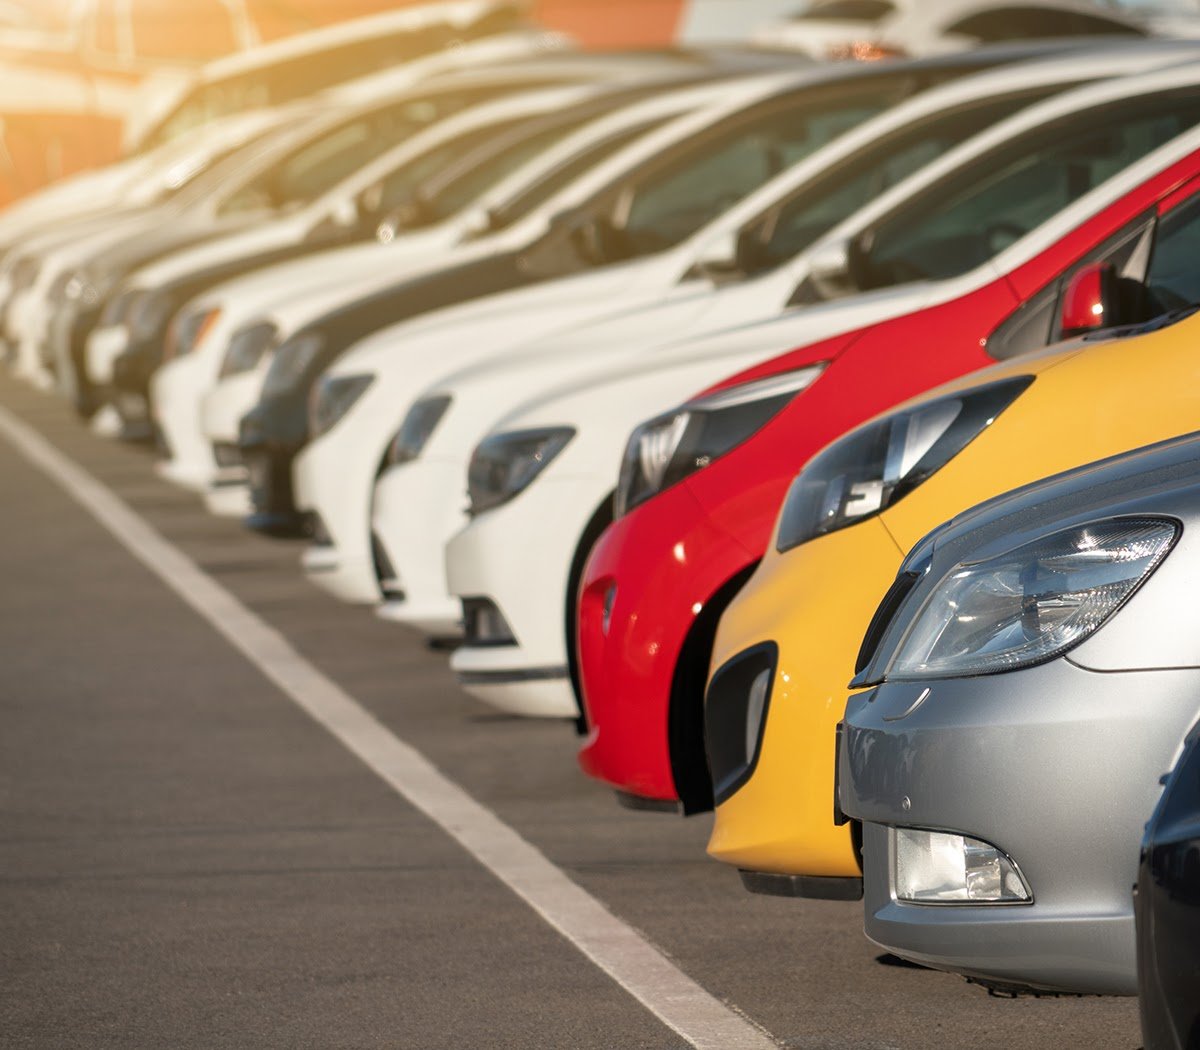 Car dealership marketing ideas: 5 ways to get your vehicles off the lot.